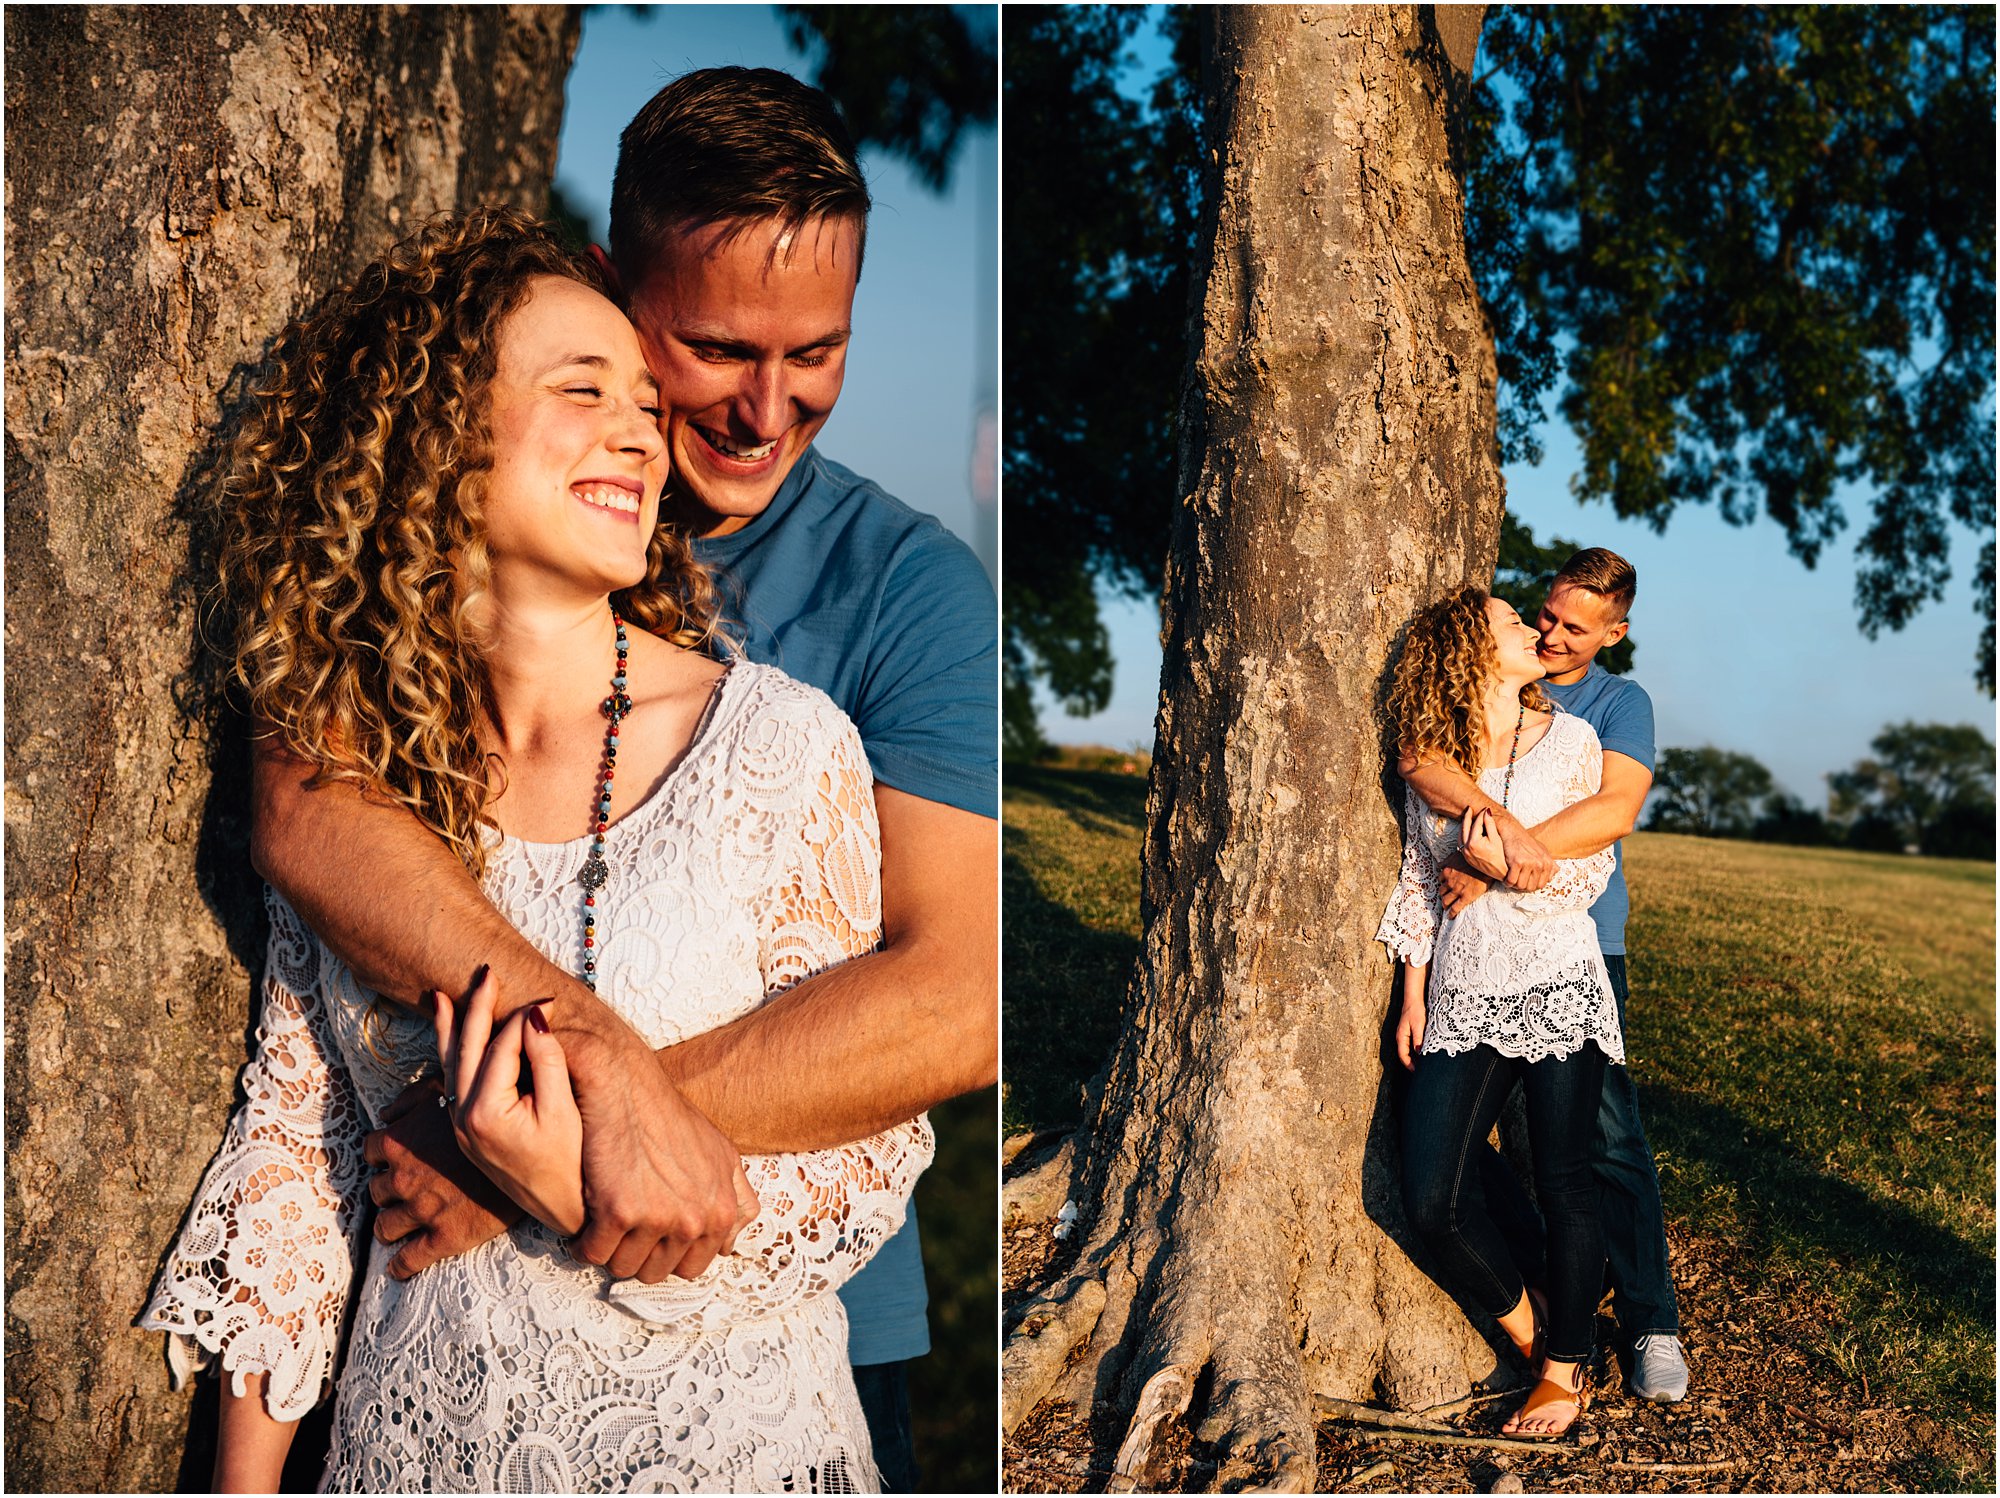 Newly engaged couple hugging and leaning against tree at Nashville's Fort Negley